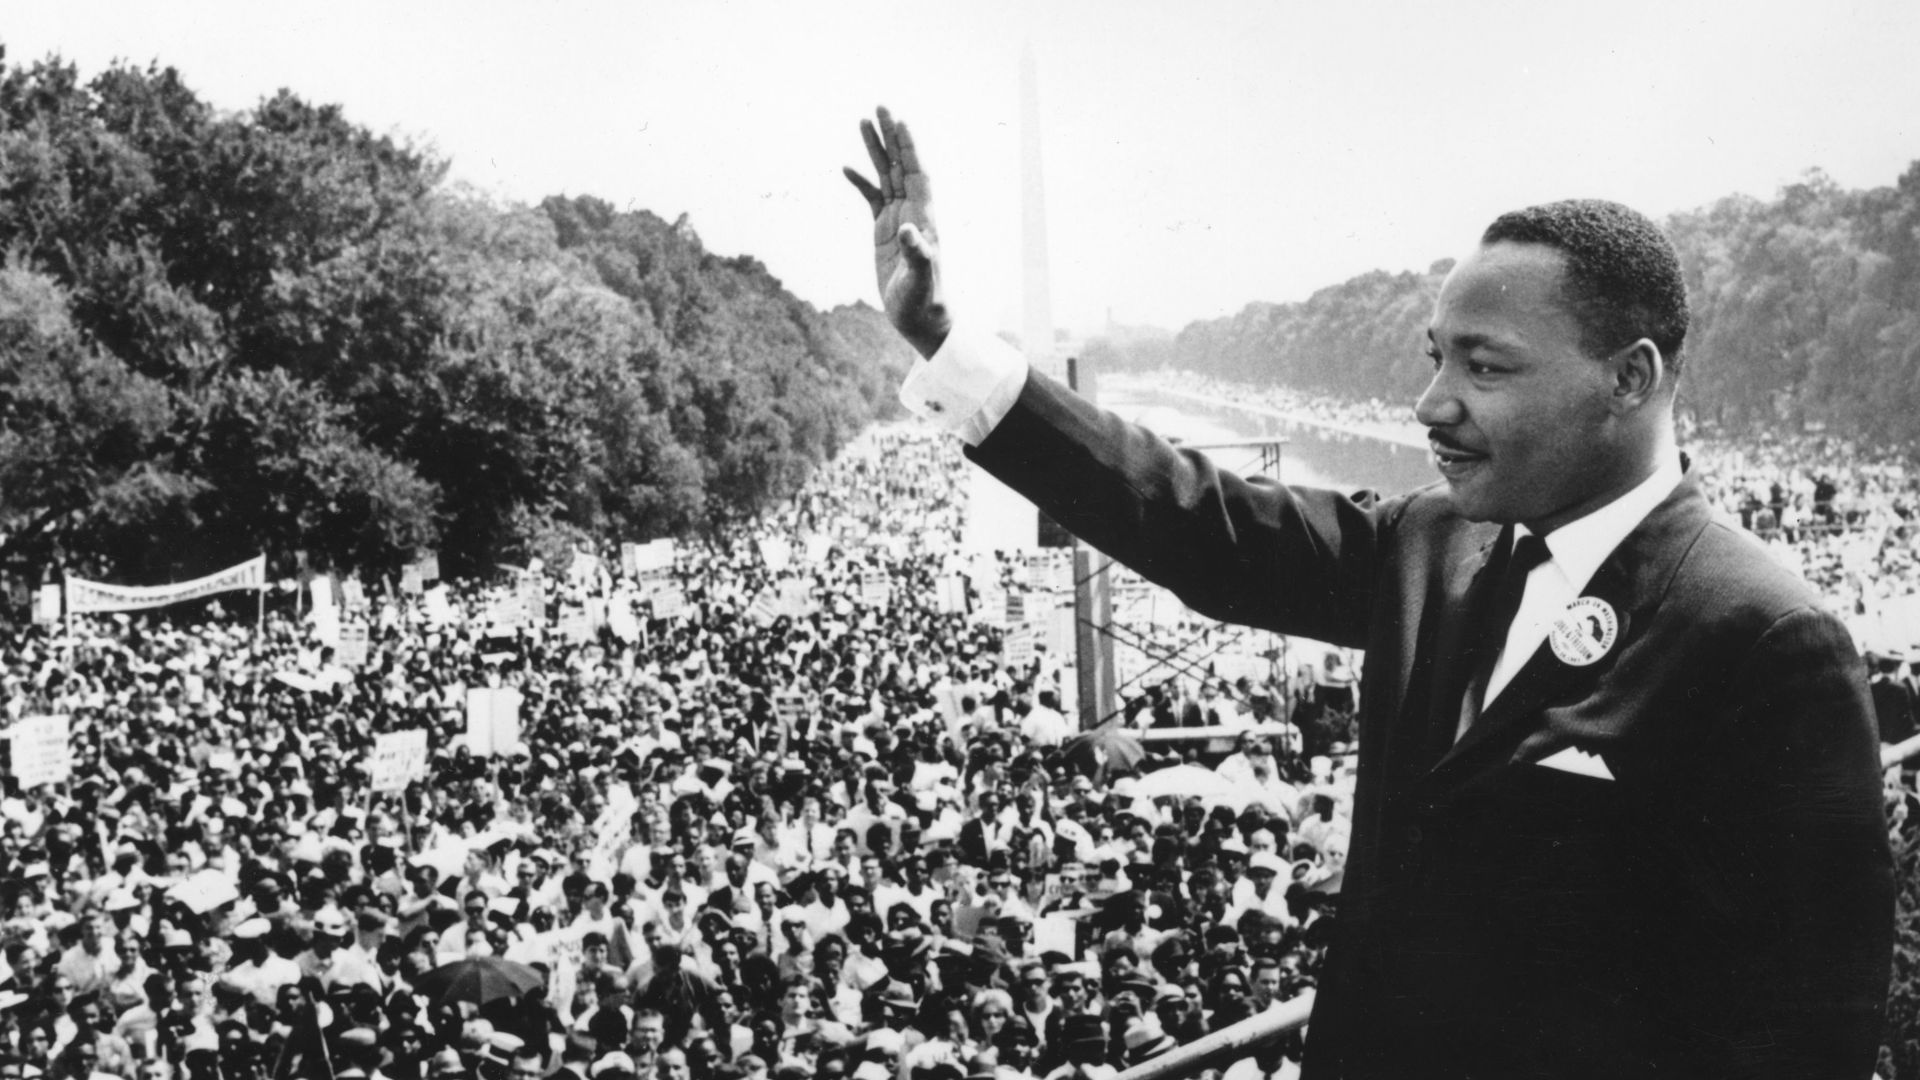 Martin Luther King, Jr. In A Suit Raising His Hand In Front Of A Large Crowd